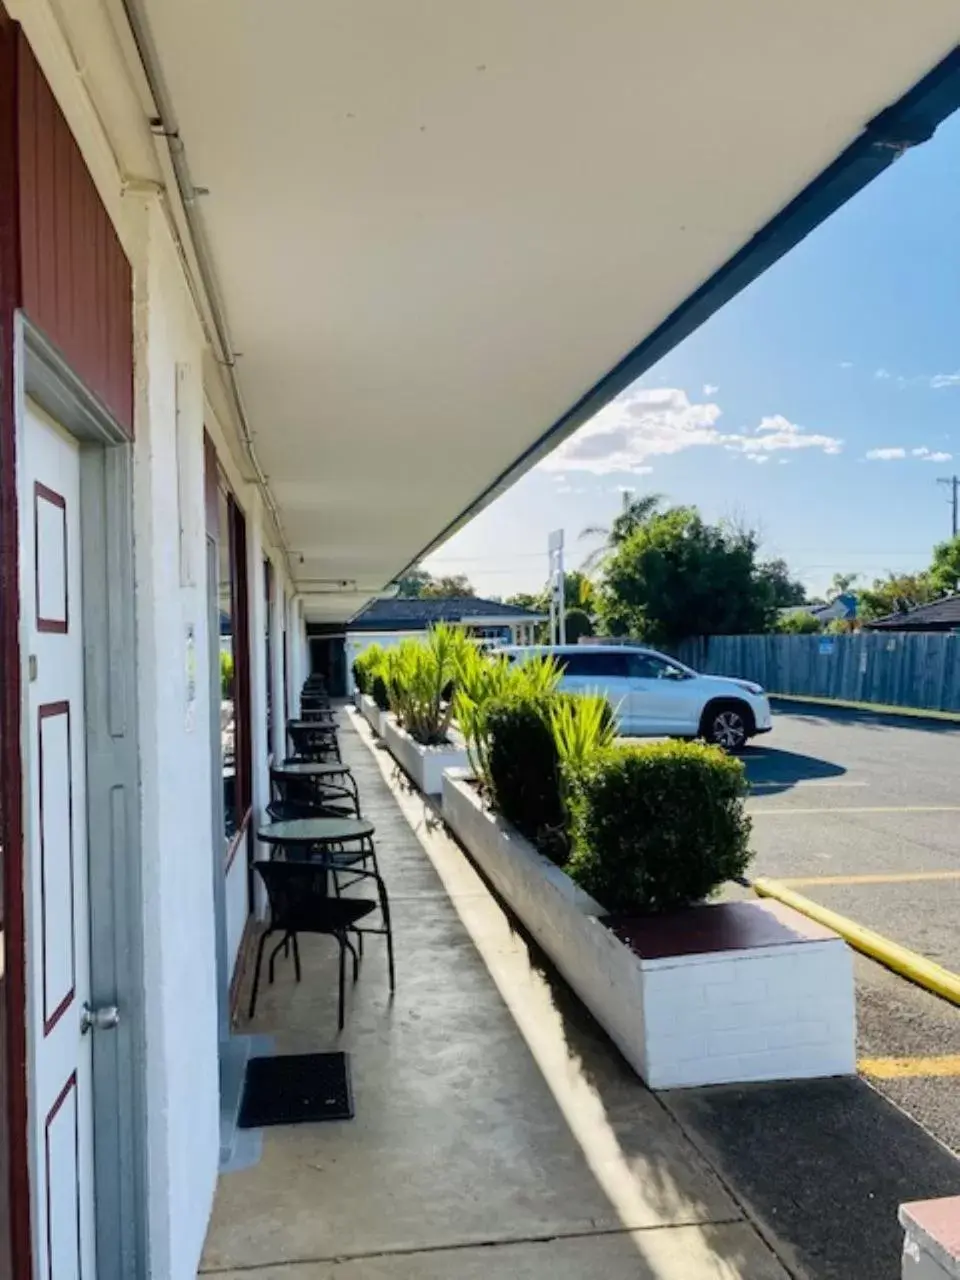 Property building in Tamworth Budget Motel